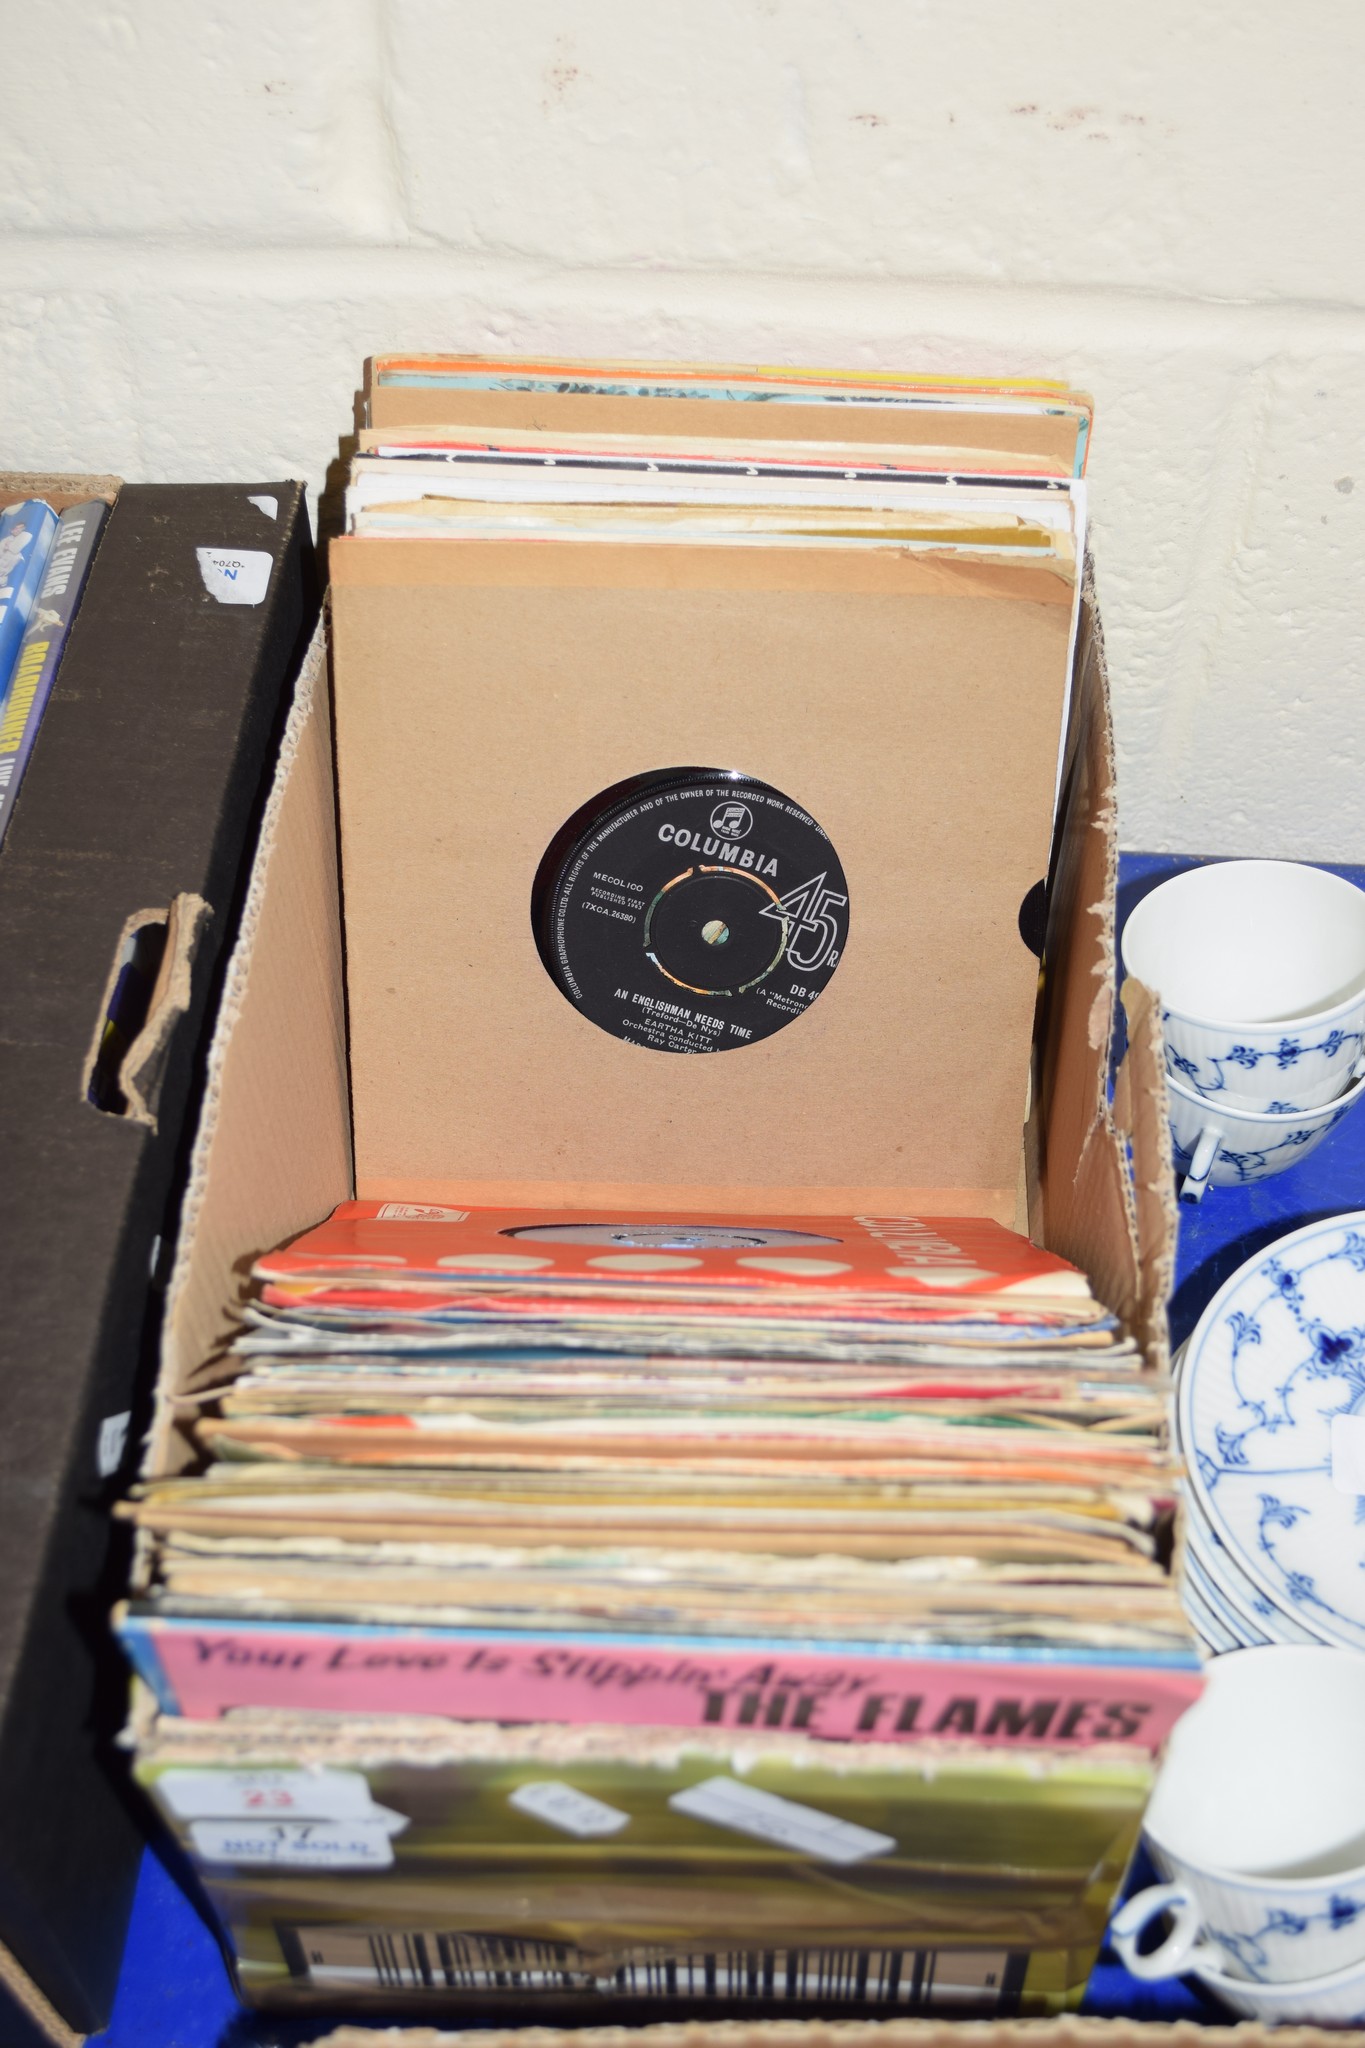 BOX CONTAINING RECORDS, 45RPM, MAINLY POP MUSIC - Image 3 of 3